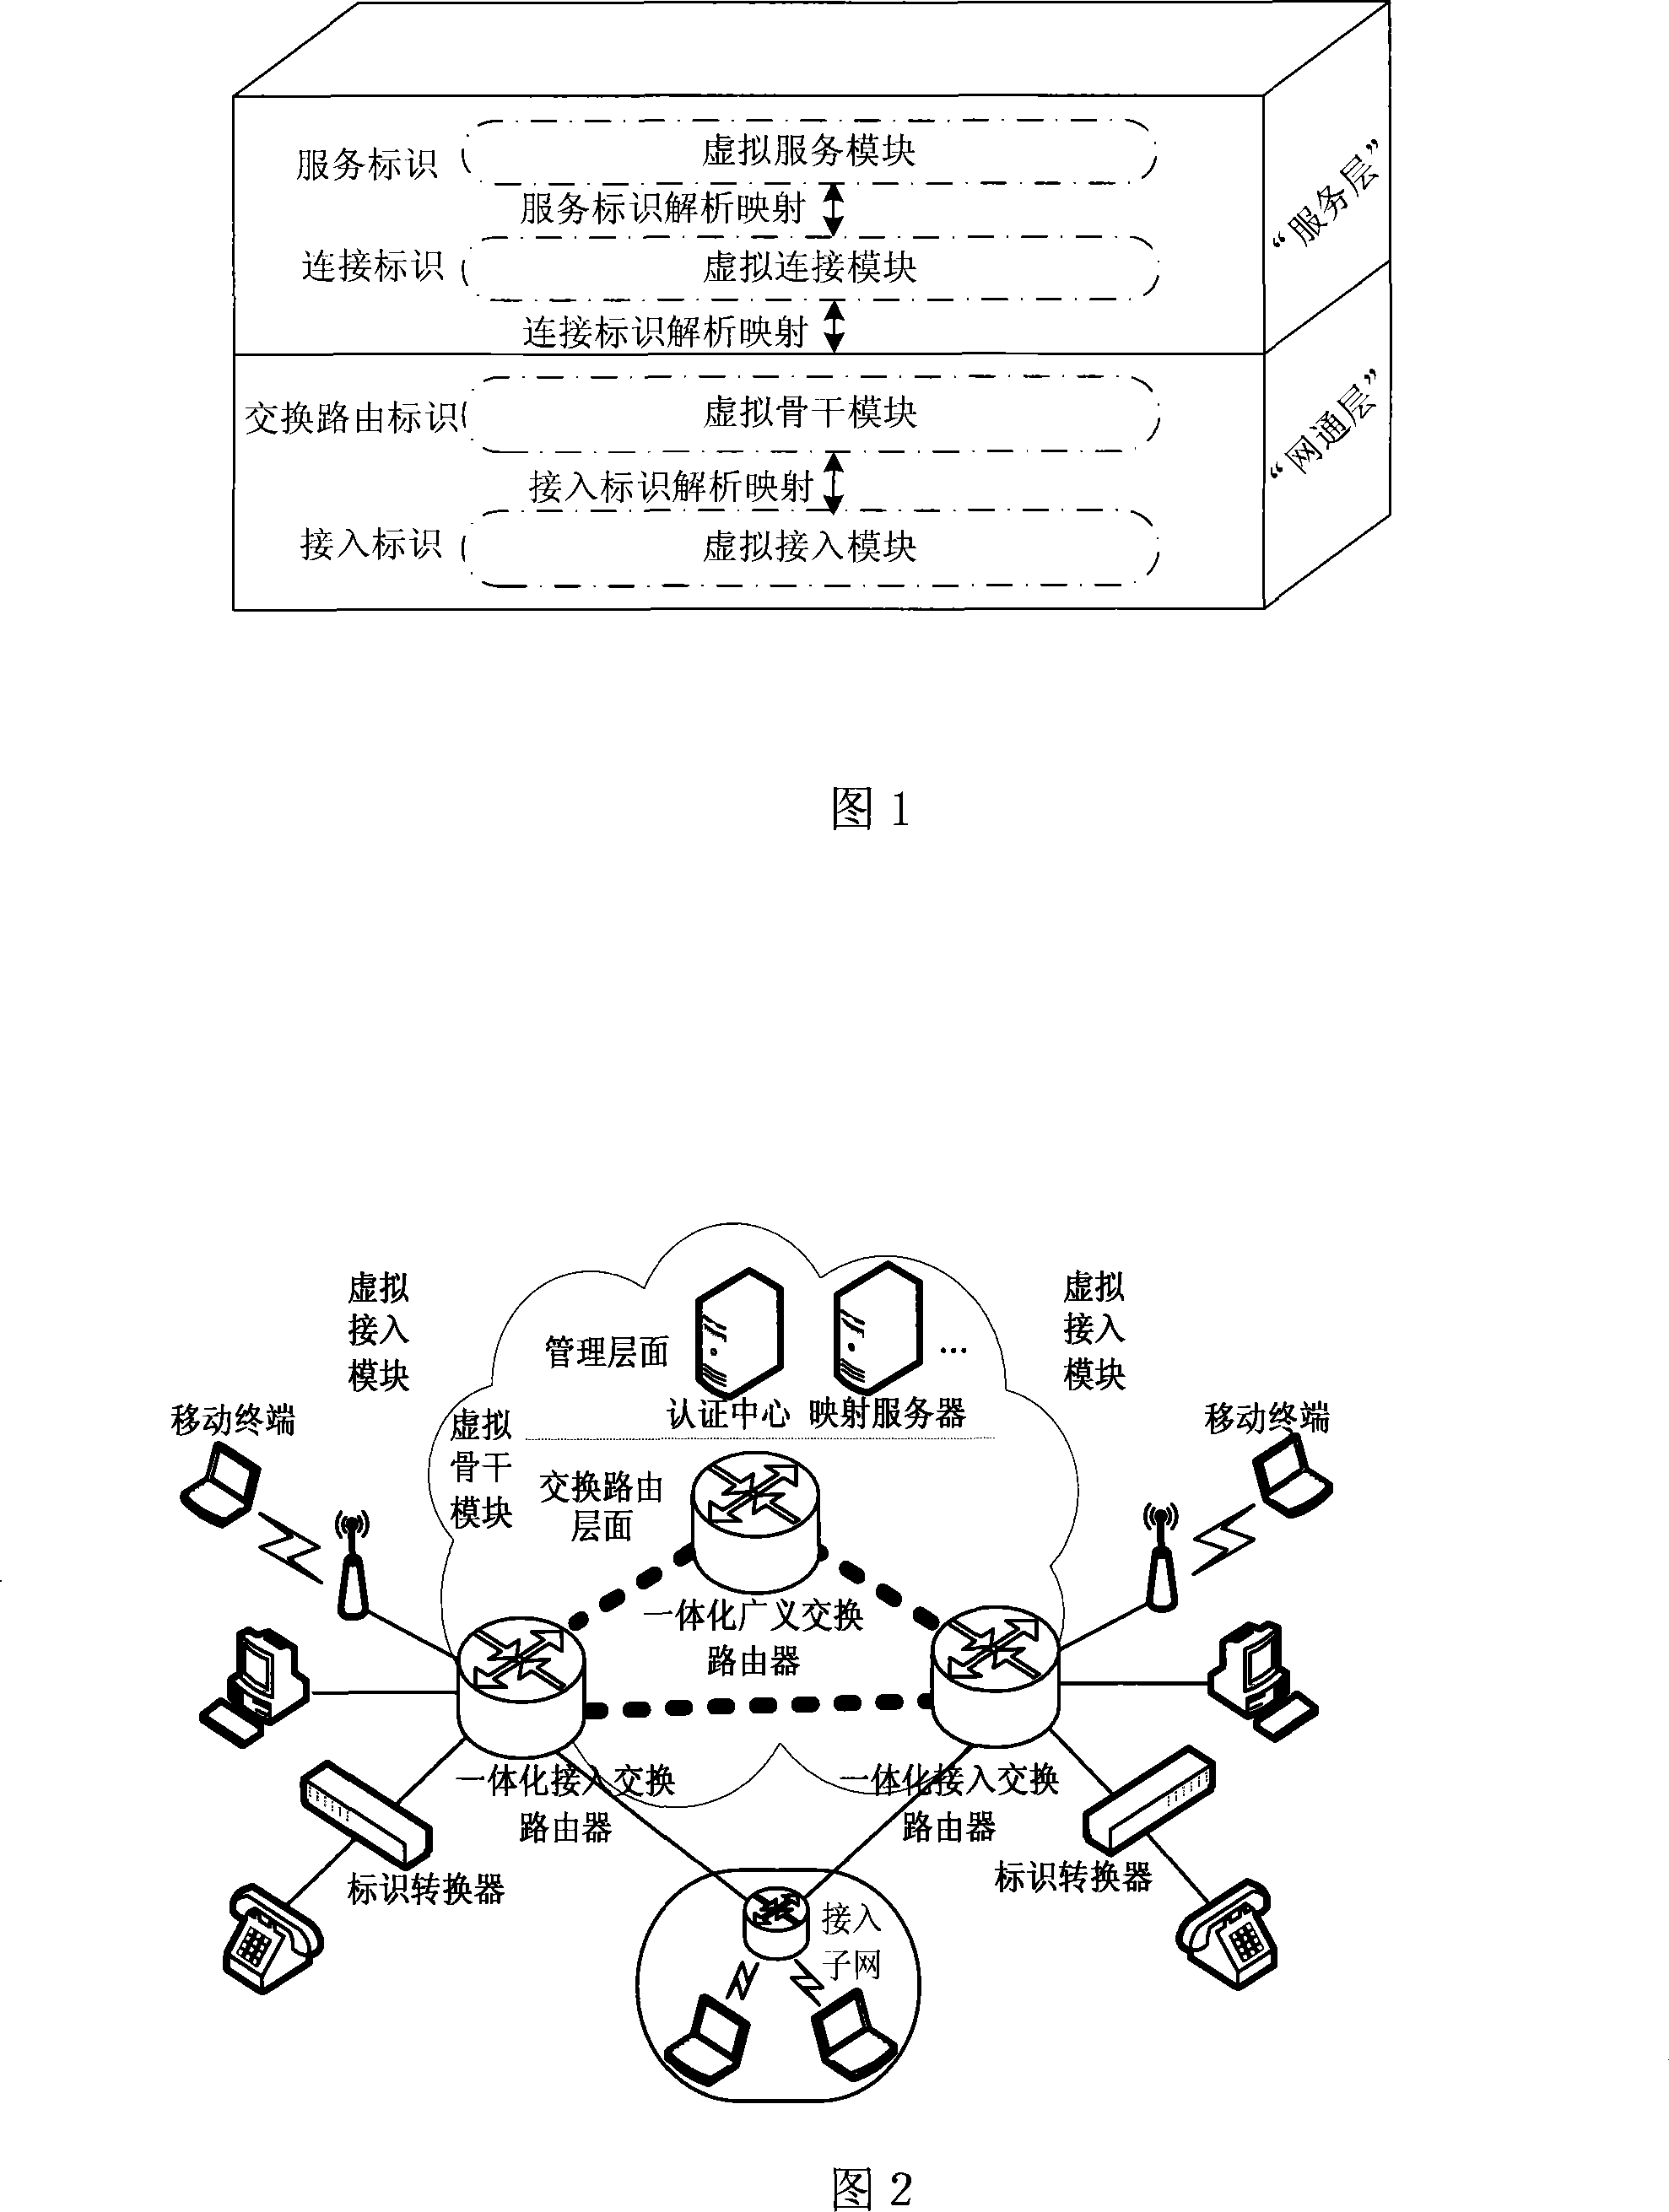 Method for implementing integrated network mobile switch management